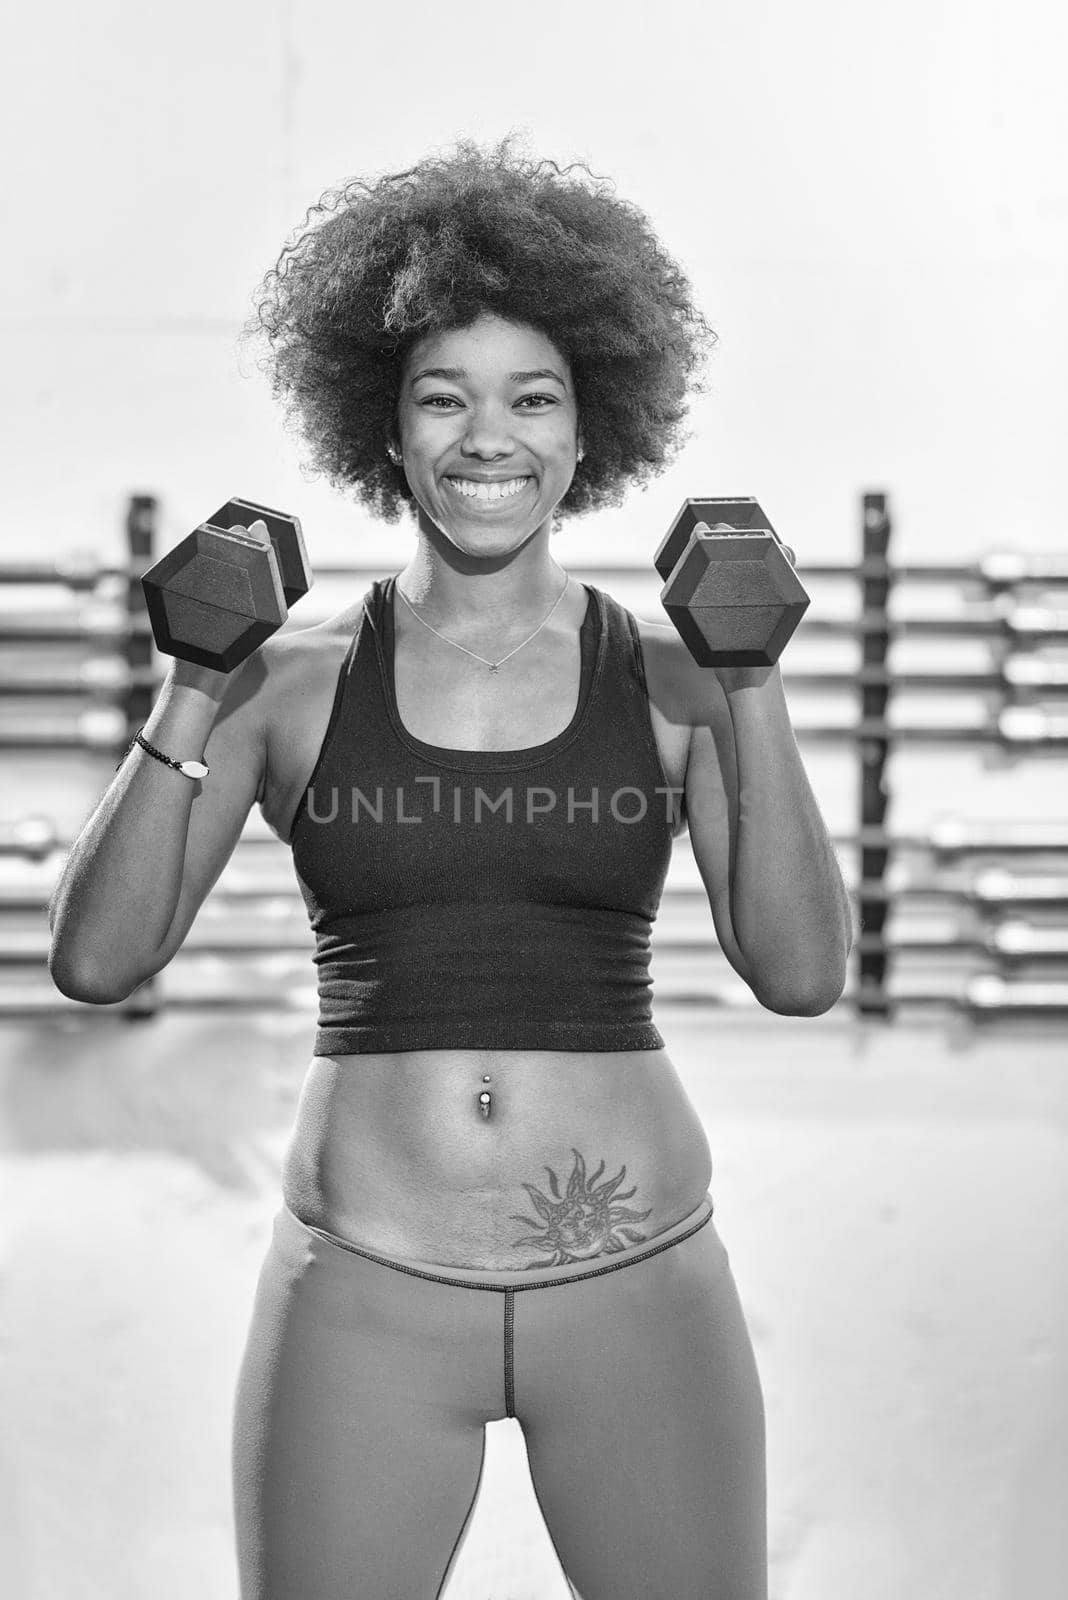 young beautiful African American woman doing bicep curls in a gym